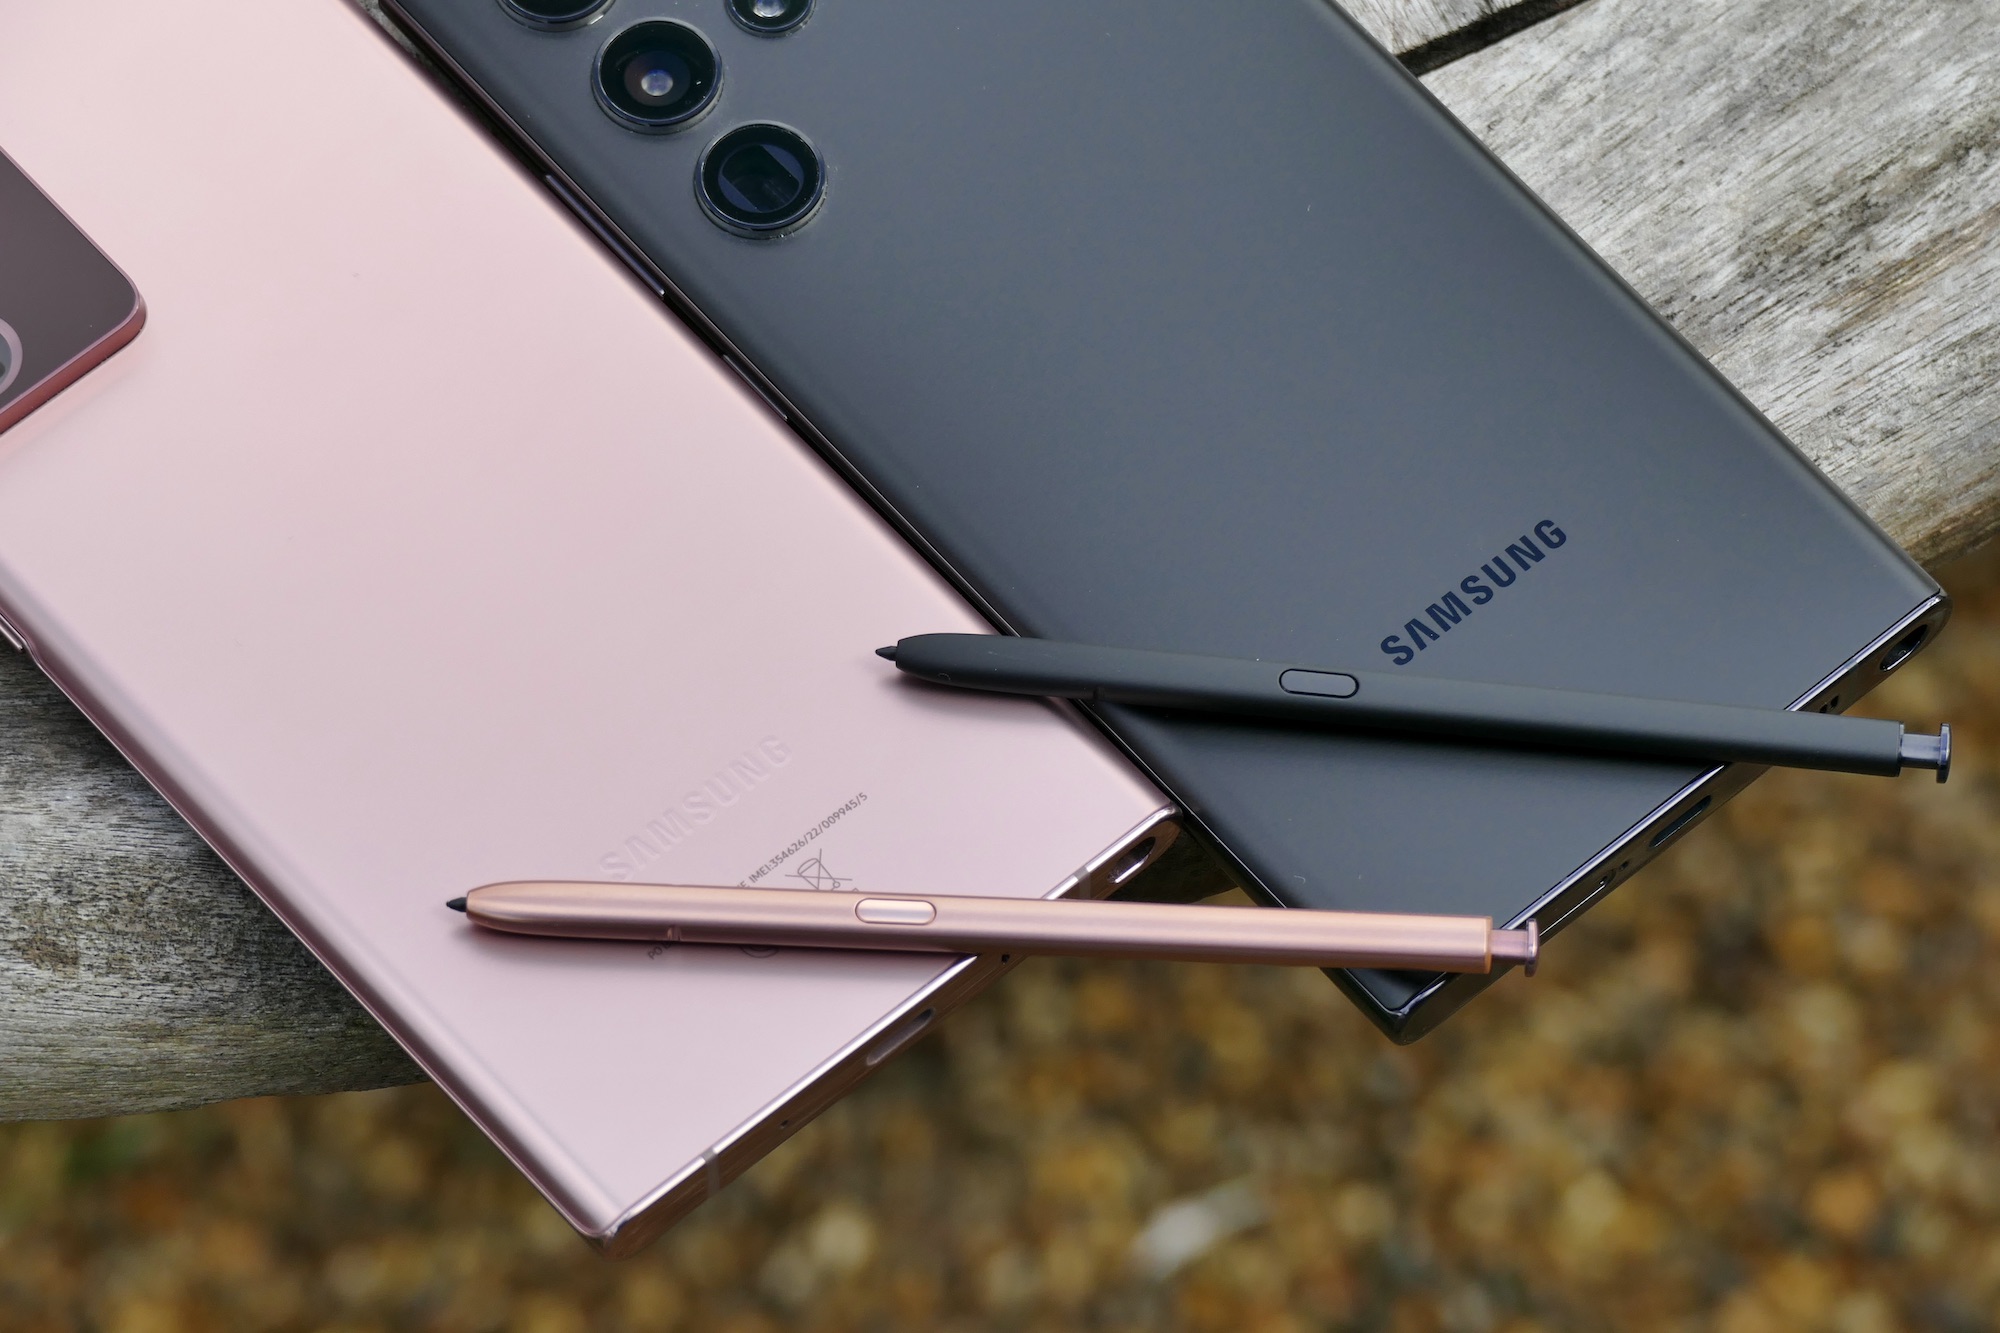 Here's how the S22 Ultra compares to the S21 Ultra and Note 20 Ultra